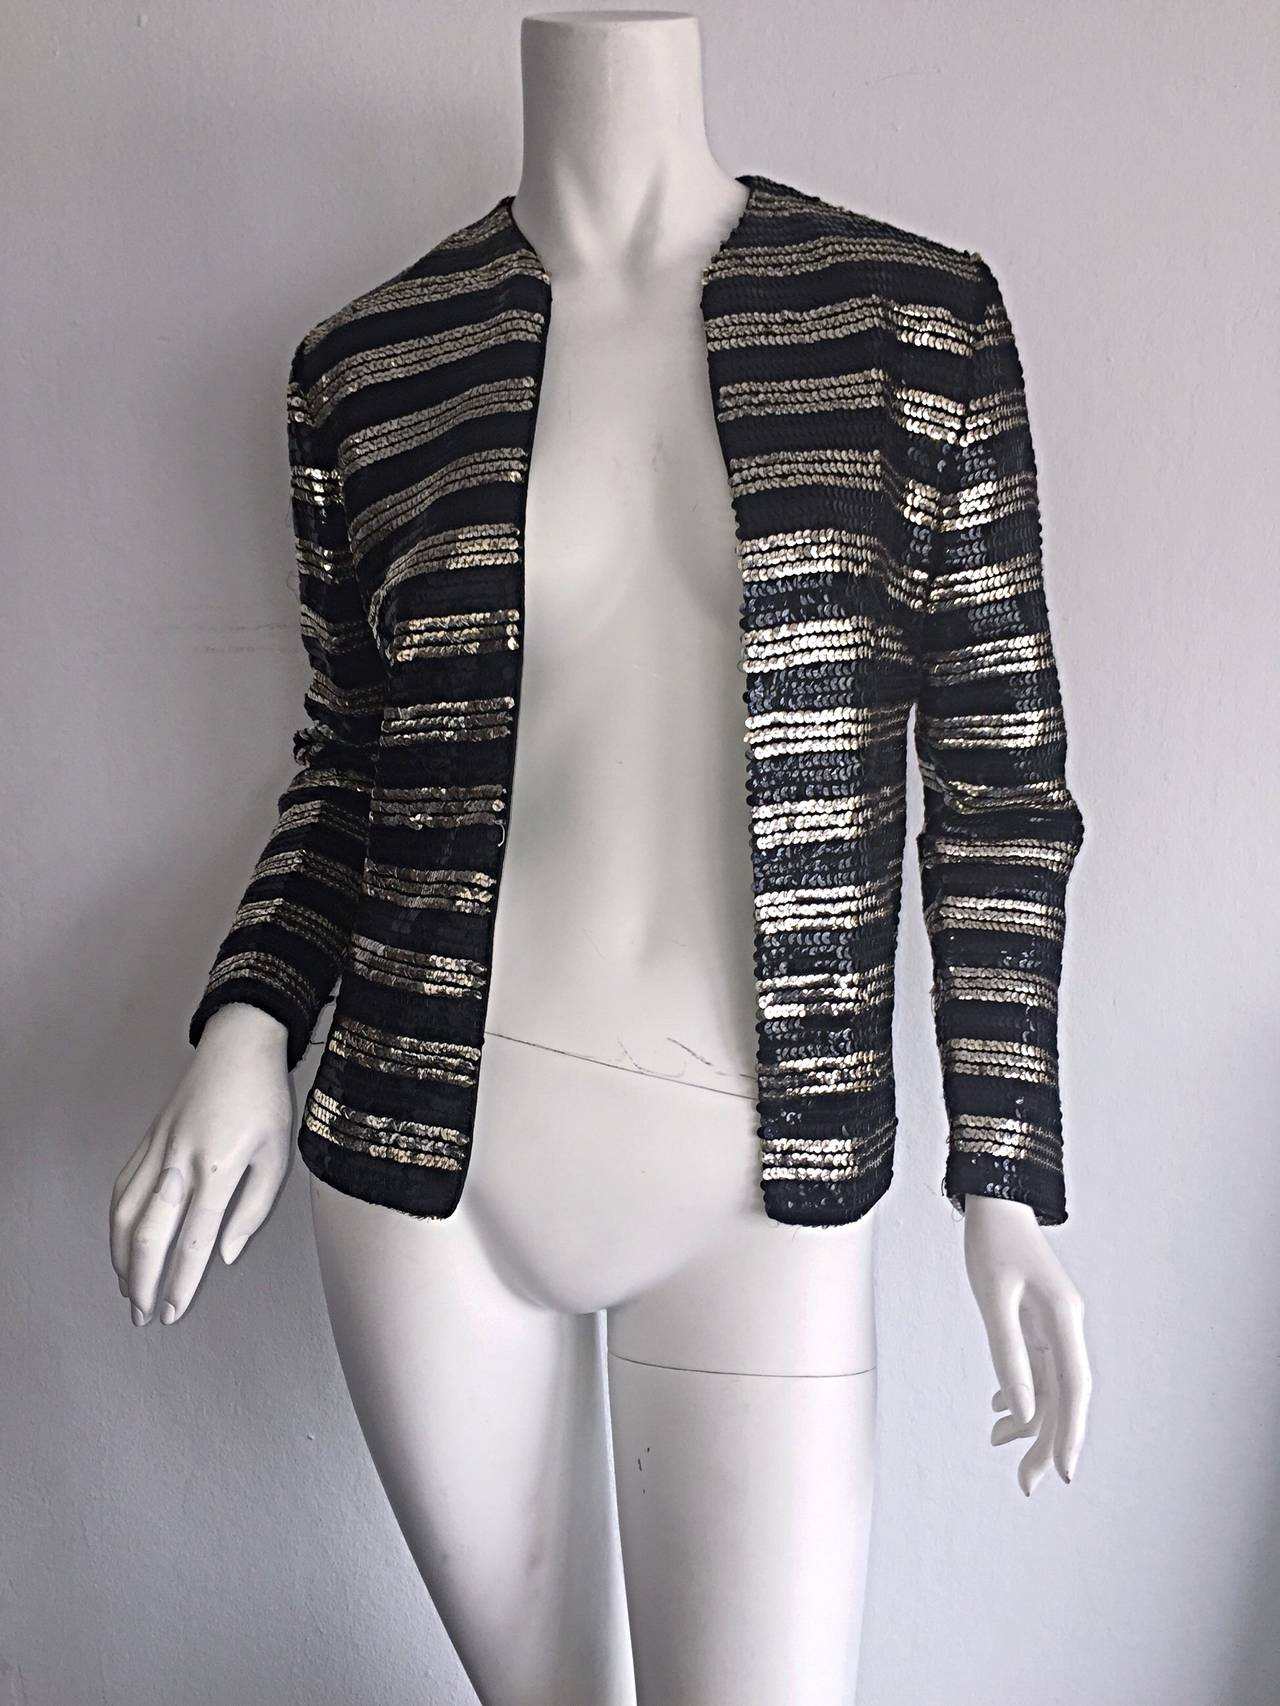 Beautiful 1950s black and white gold sequin cardigan by French design House, Malbe Original! Open faced cardigan has an appealing fit, with all over sequins. The perfect layering piece! Goes great with jeans, yet stunning over a cocktail dress.